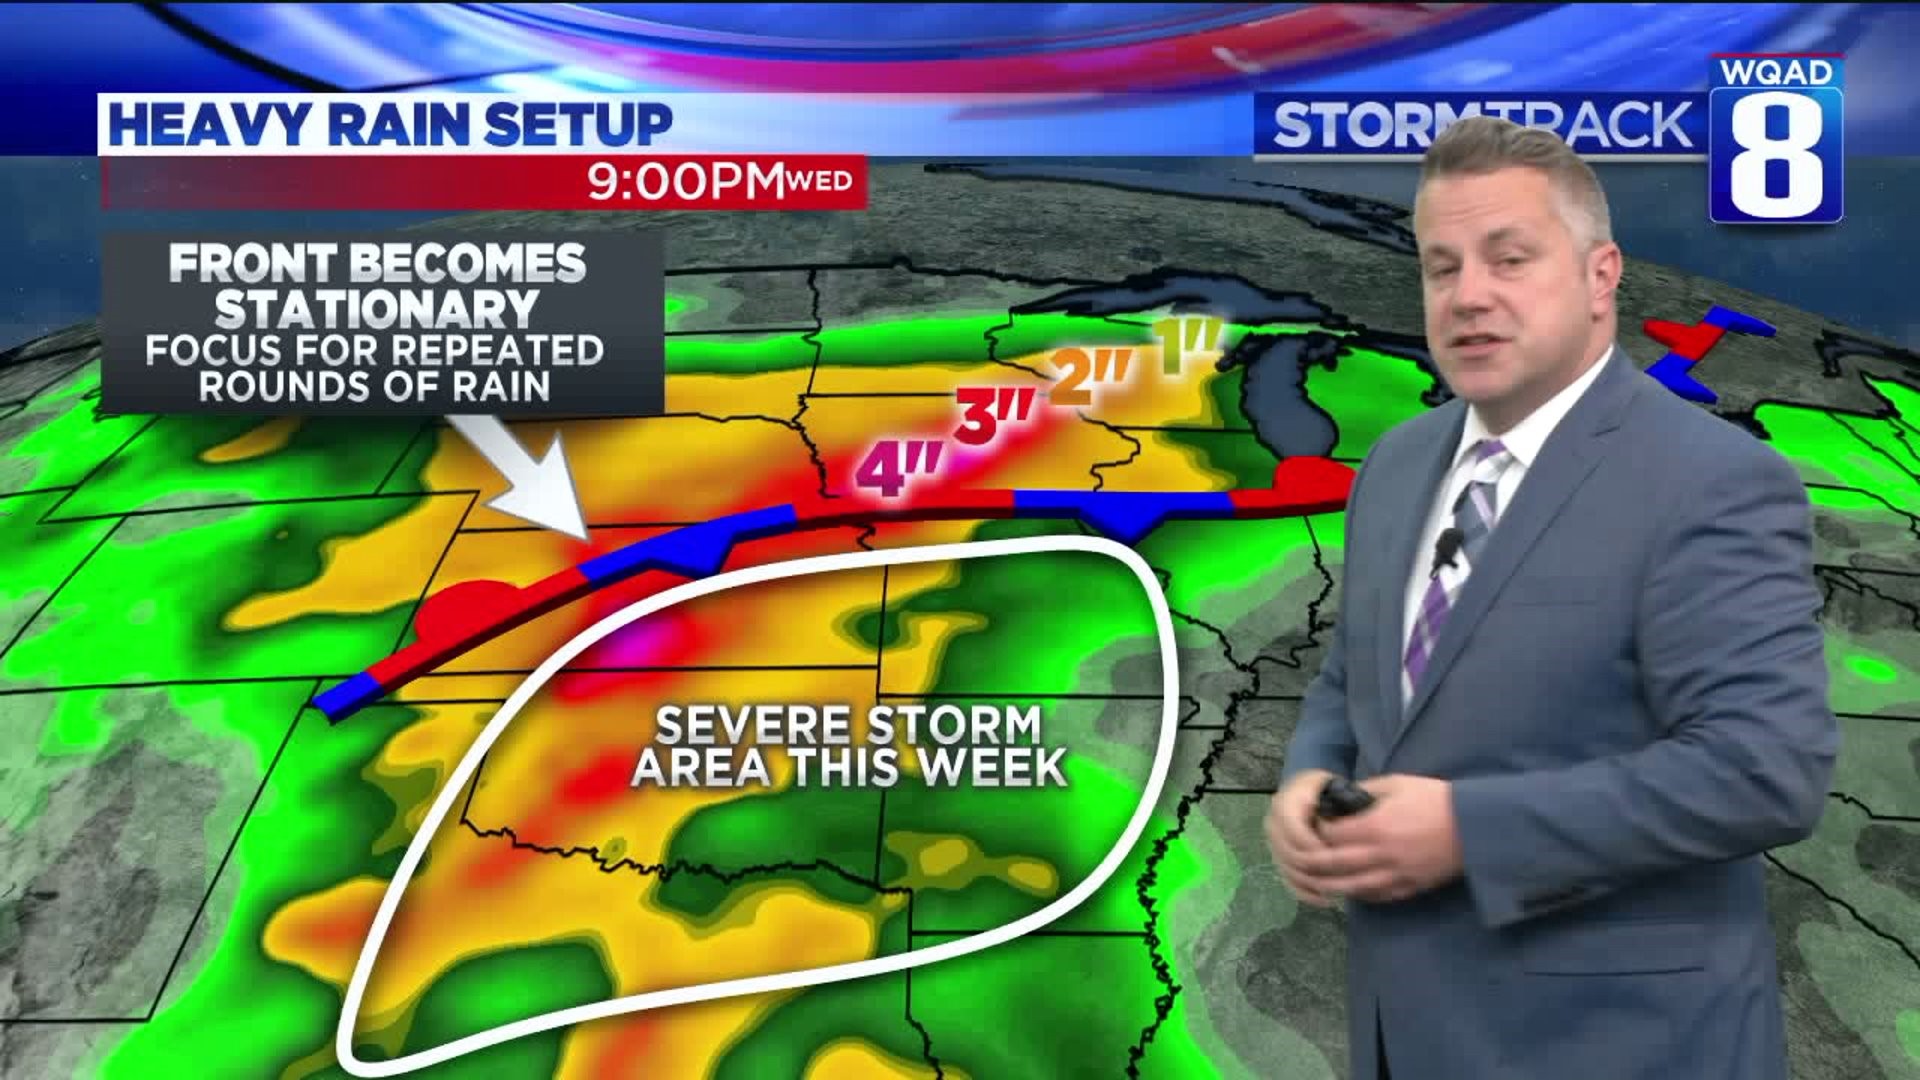 Eric is tracking more heavy rain by midweek